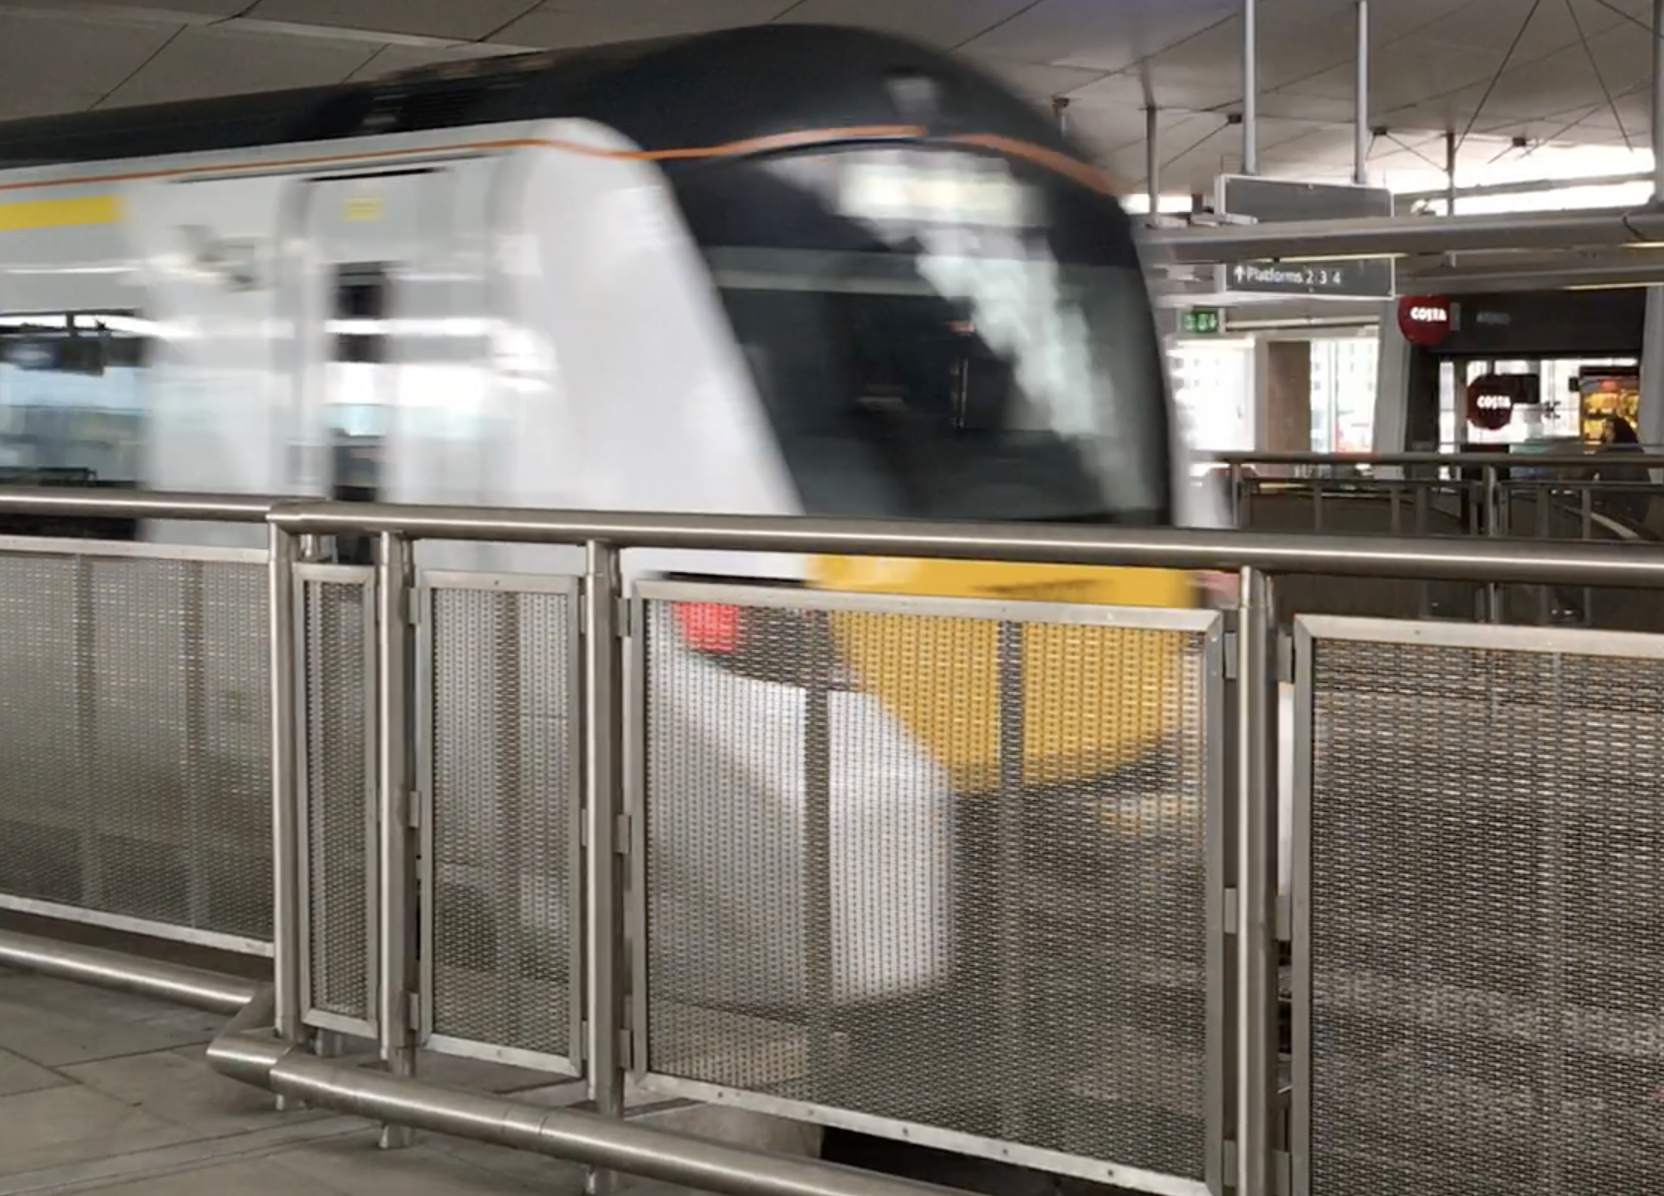 Through train: Thameslink service arriving at London Blackfriars, at the heart of the Thameslink network